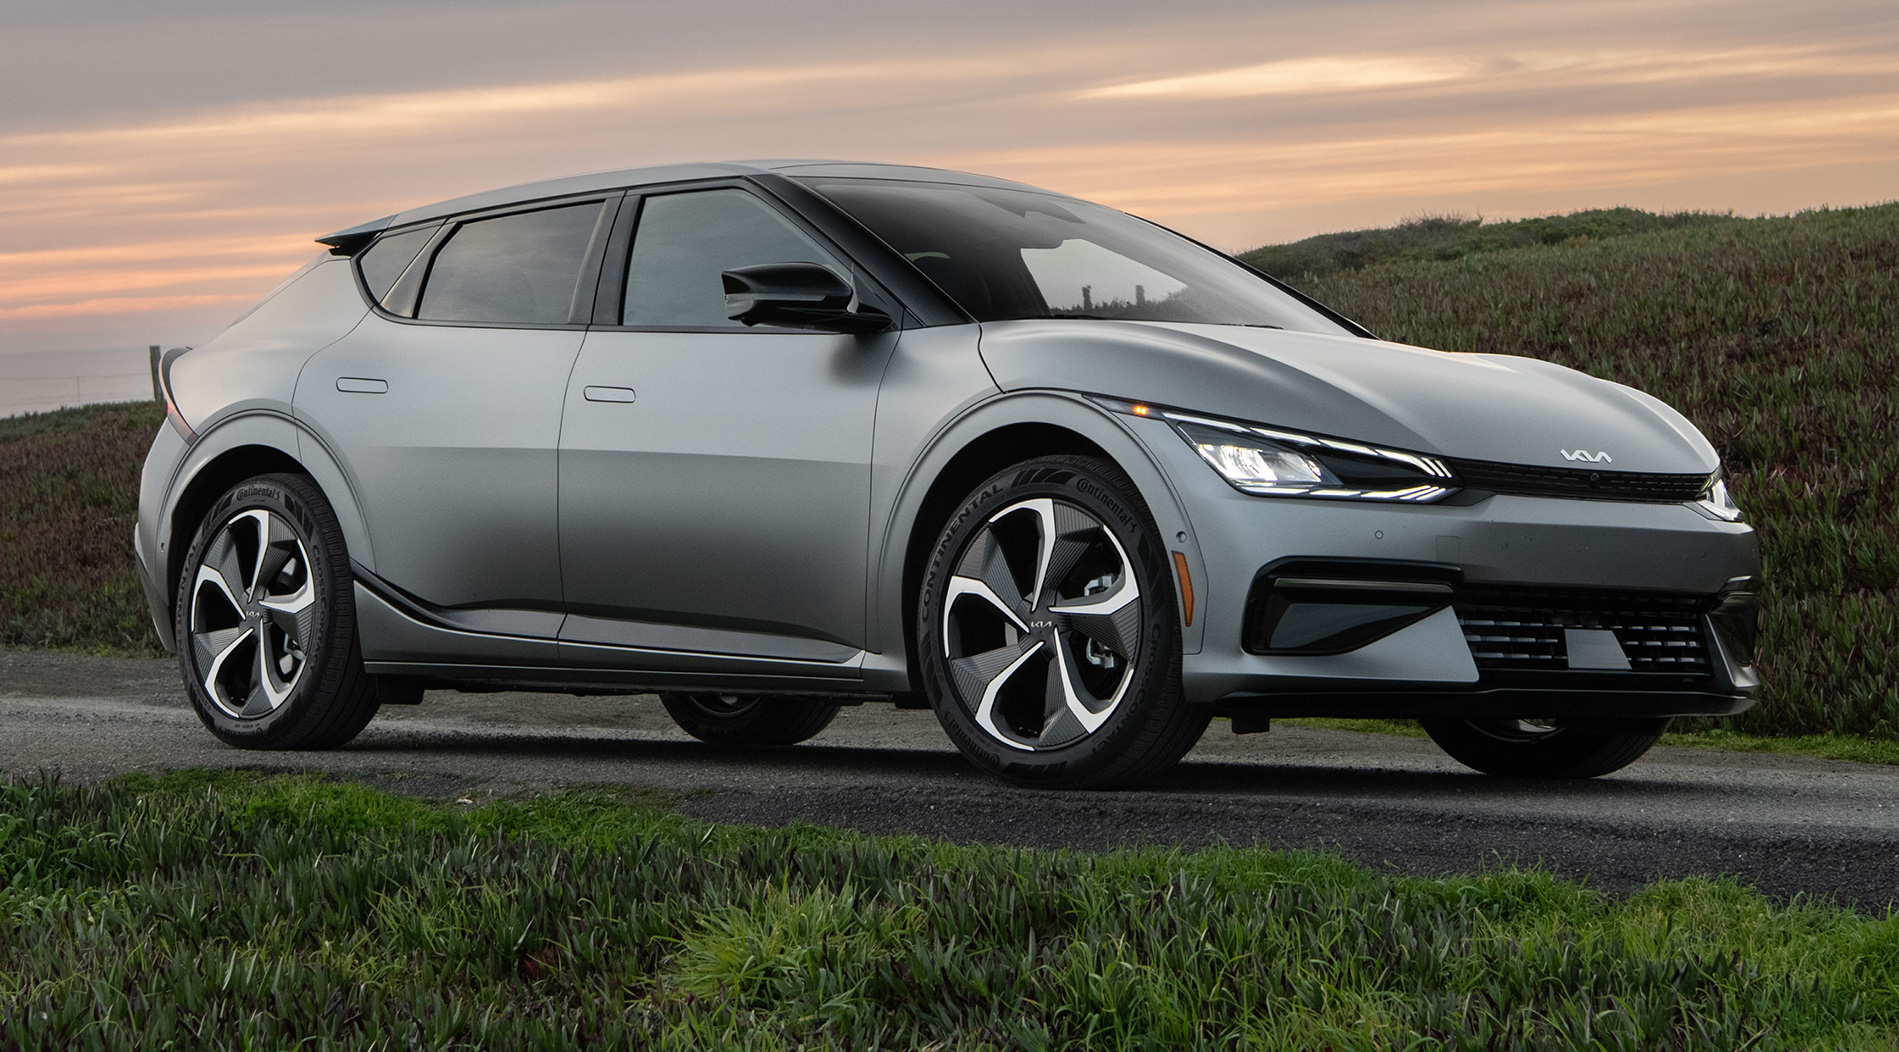 The Top 5 Electric Family Cars of 2022